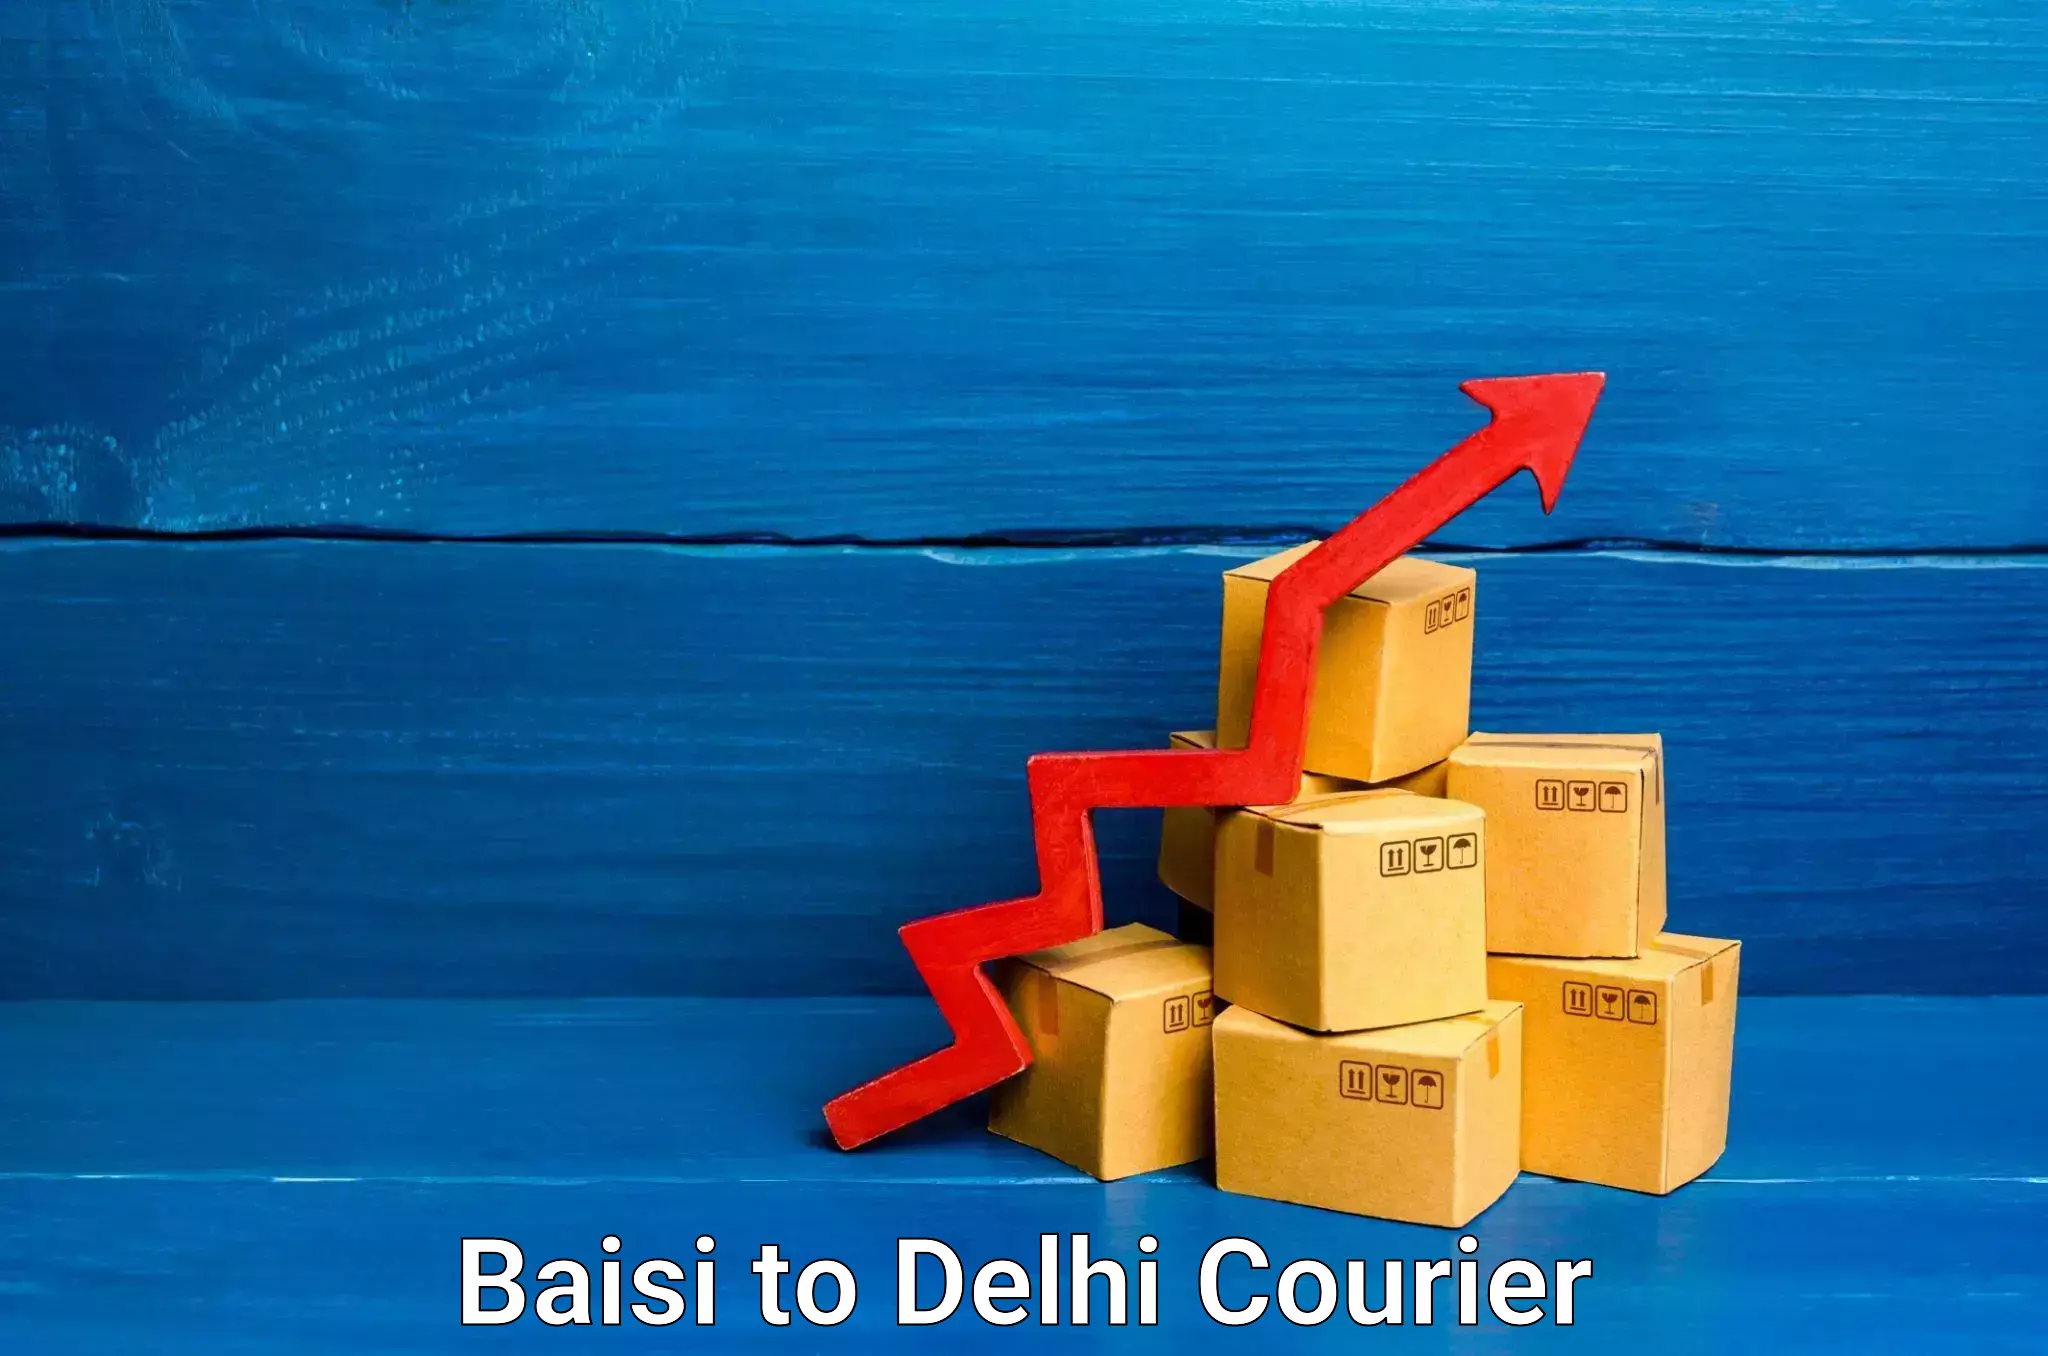 Budget-friendly movers Baisi to Lodhi Road